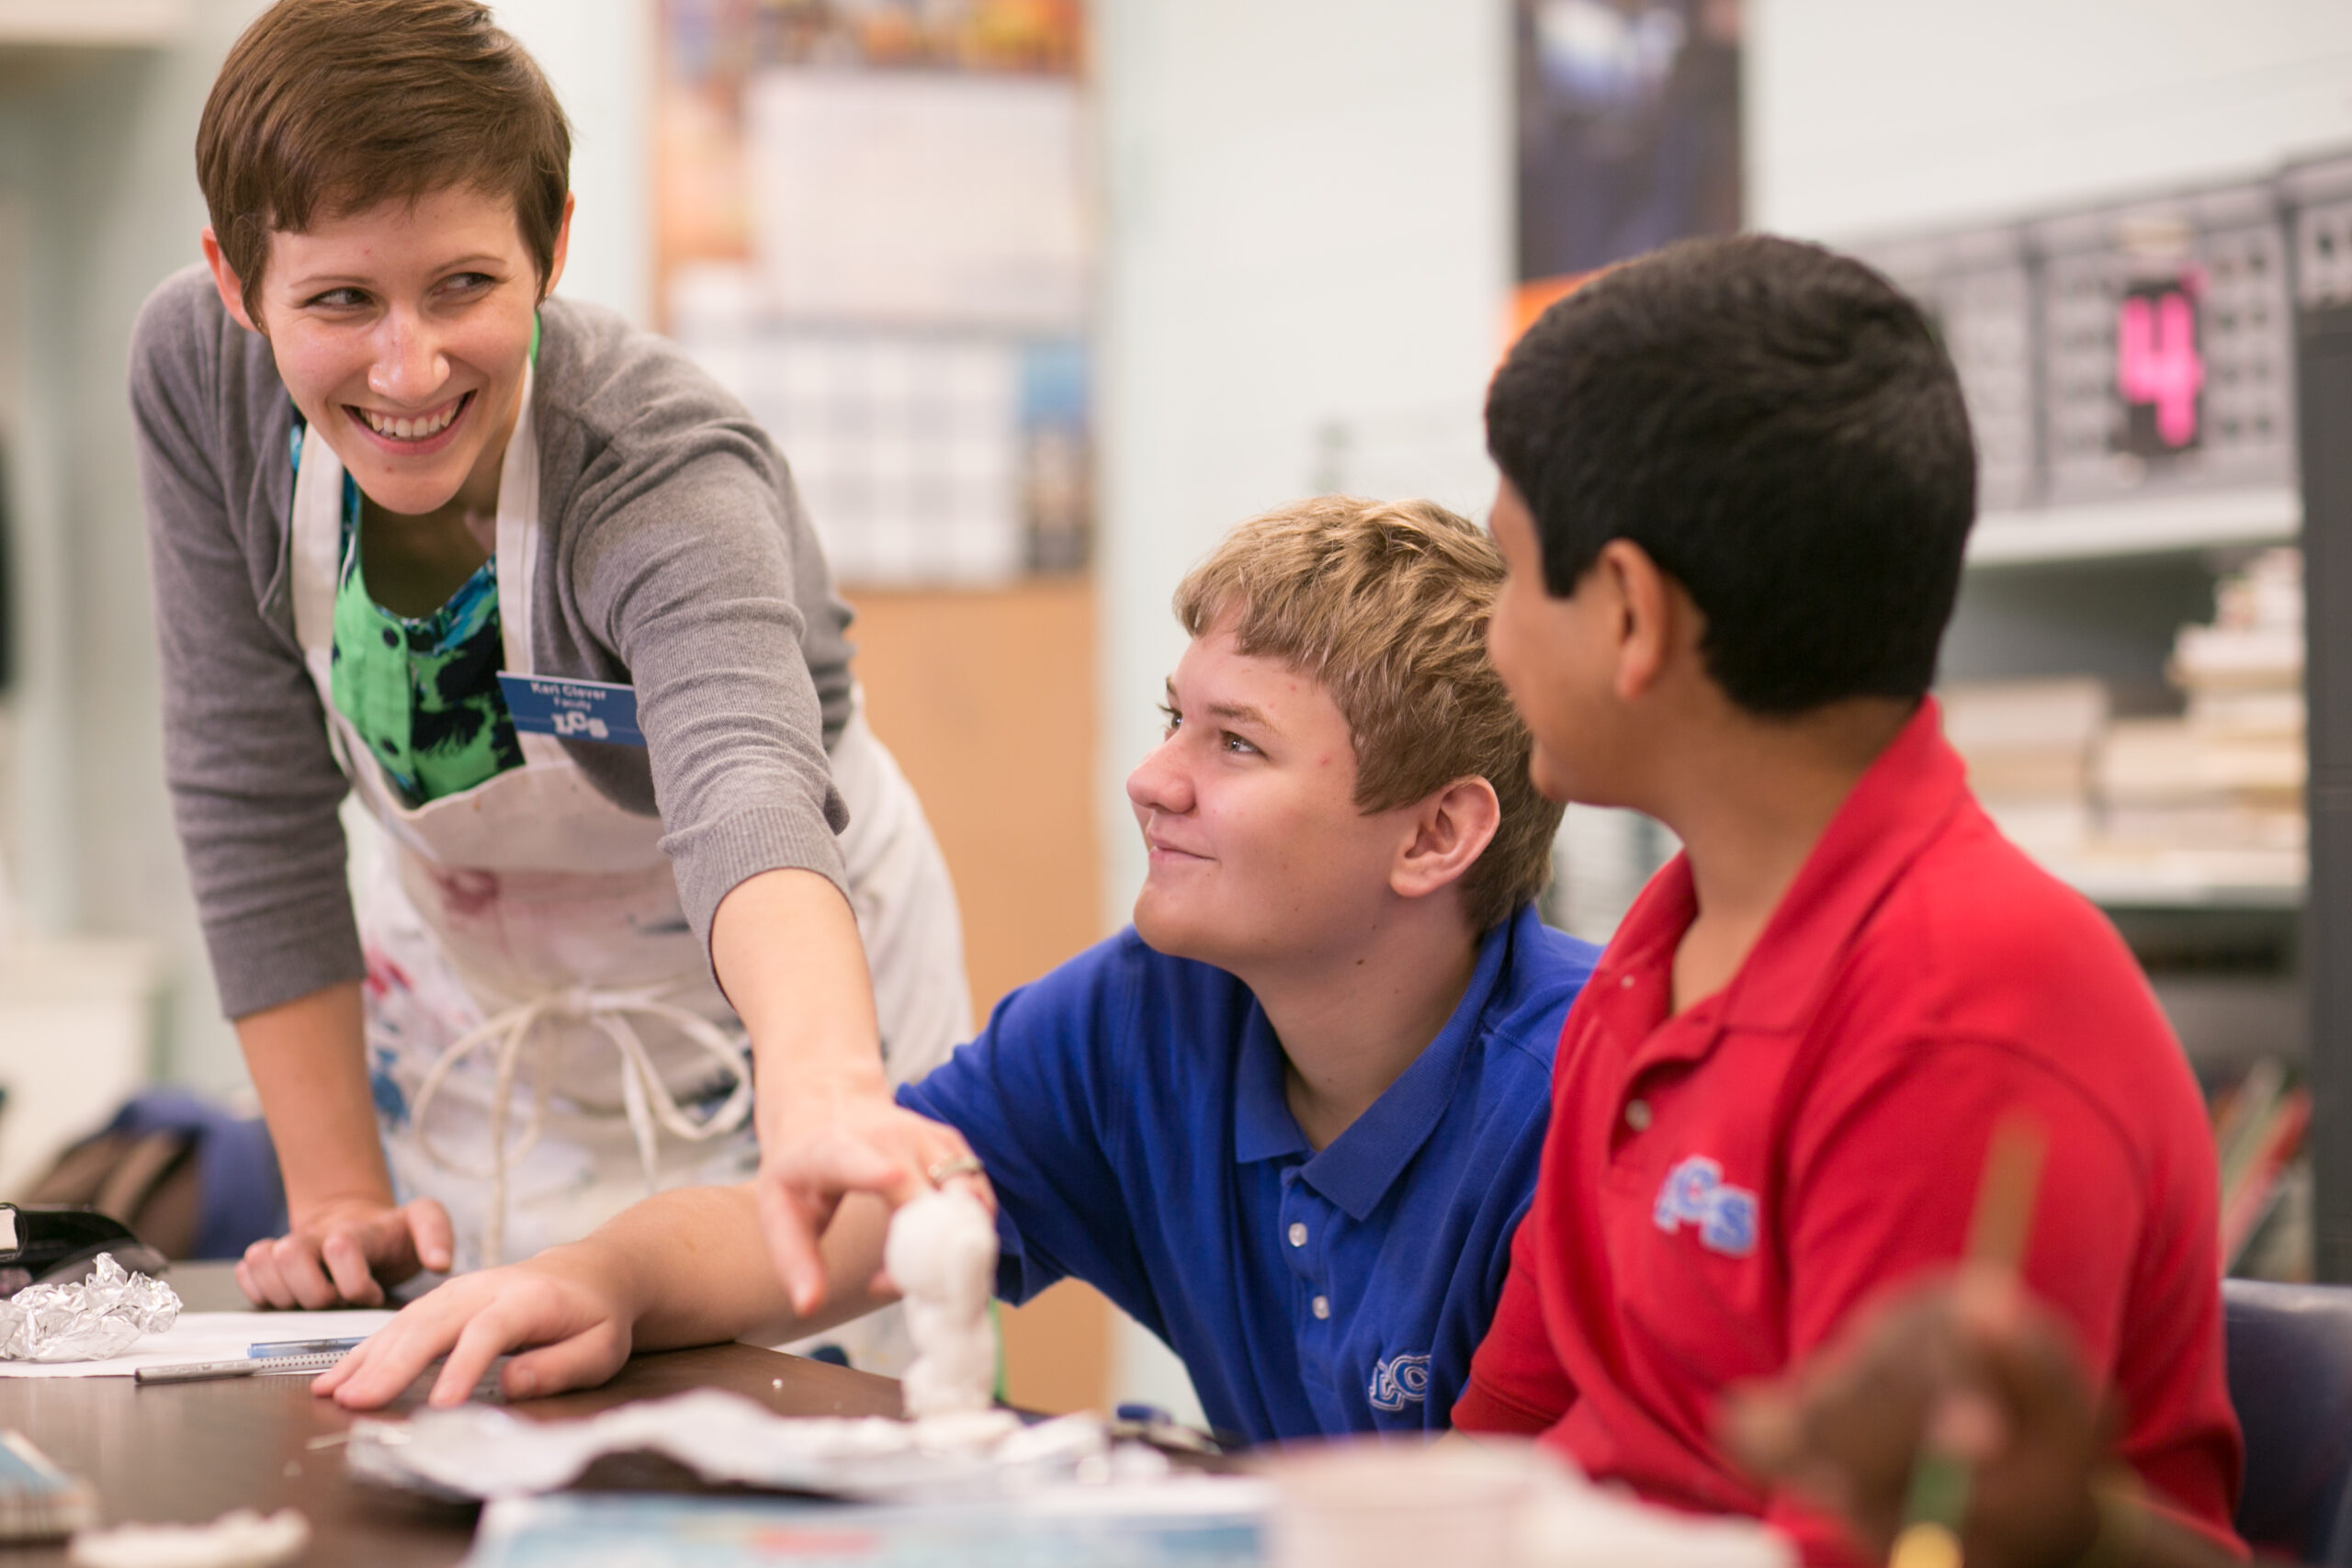 art teacher, Kari clever assisting students in an art class with two students pictured